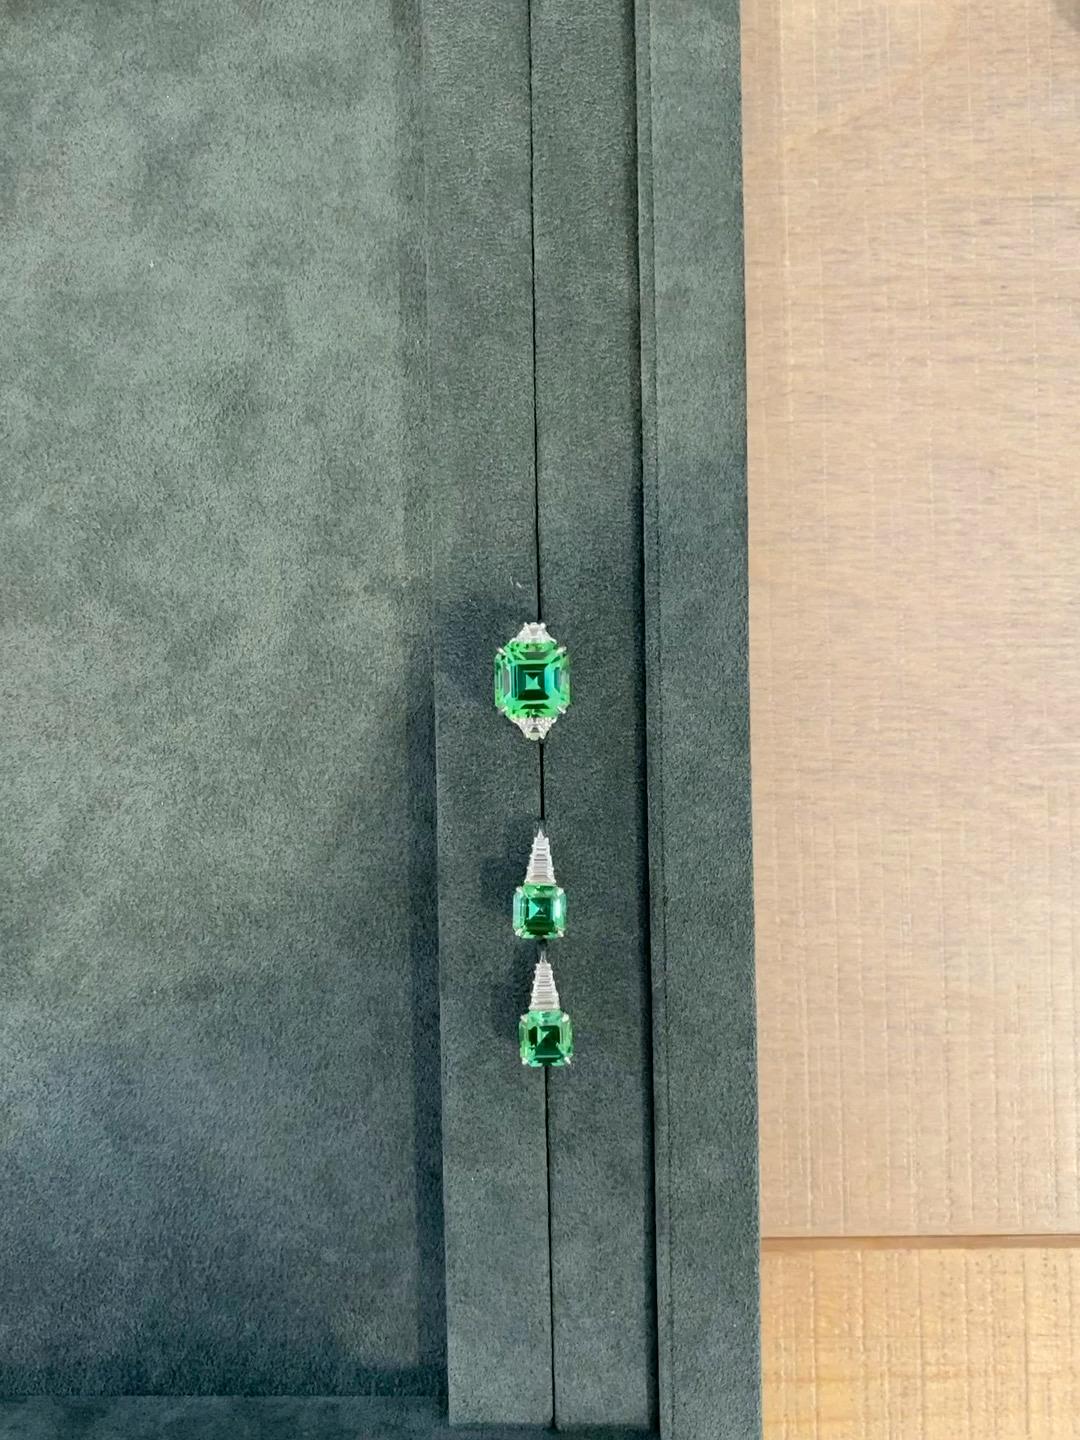 Mint Green Tourmaline “GRACE” Earrings in 18k White Gold In New Condition For Sale In Brooklyn, NY